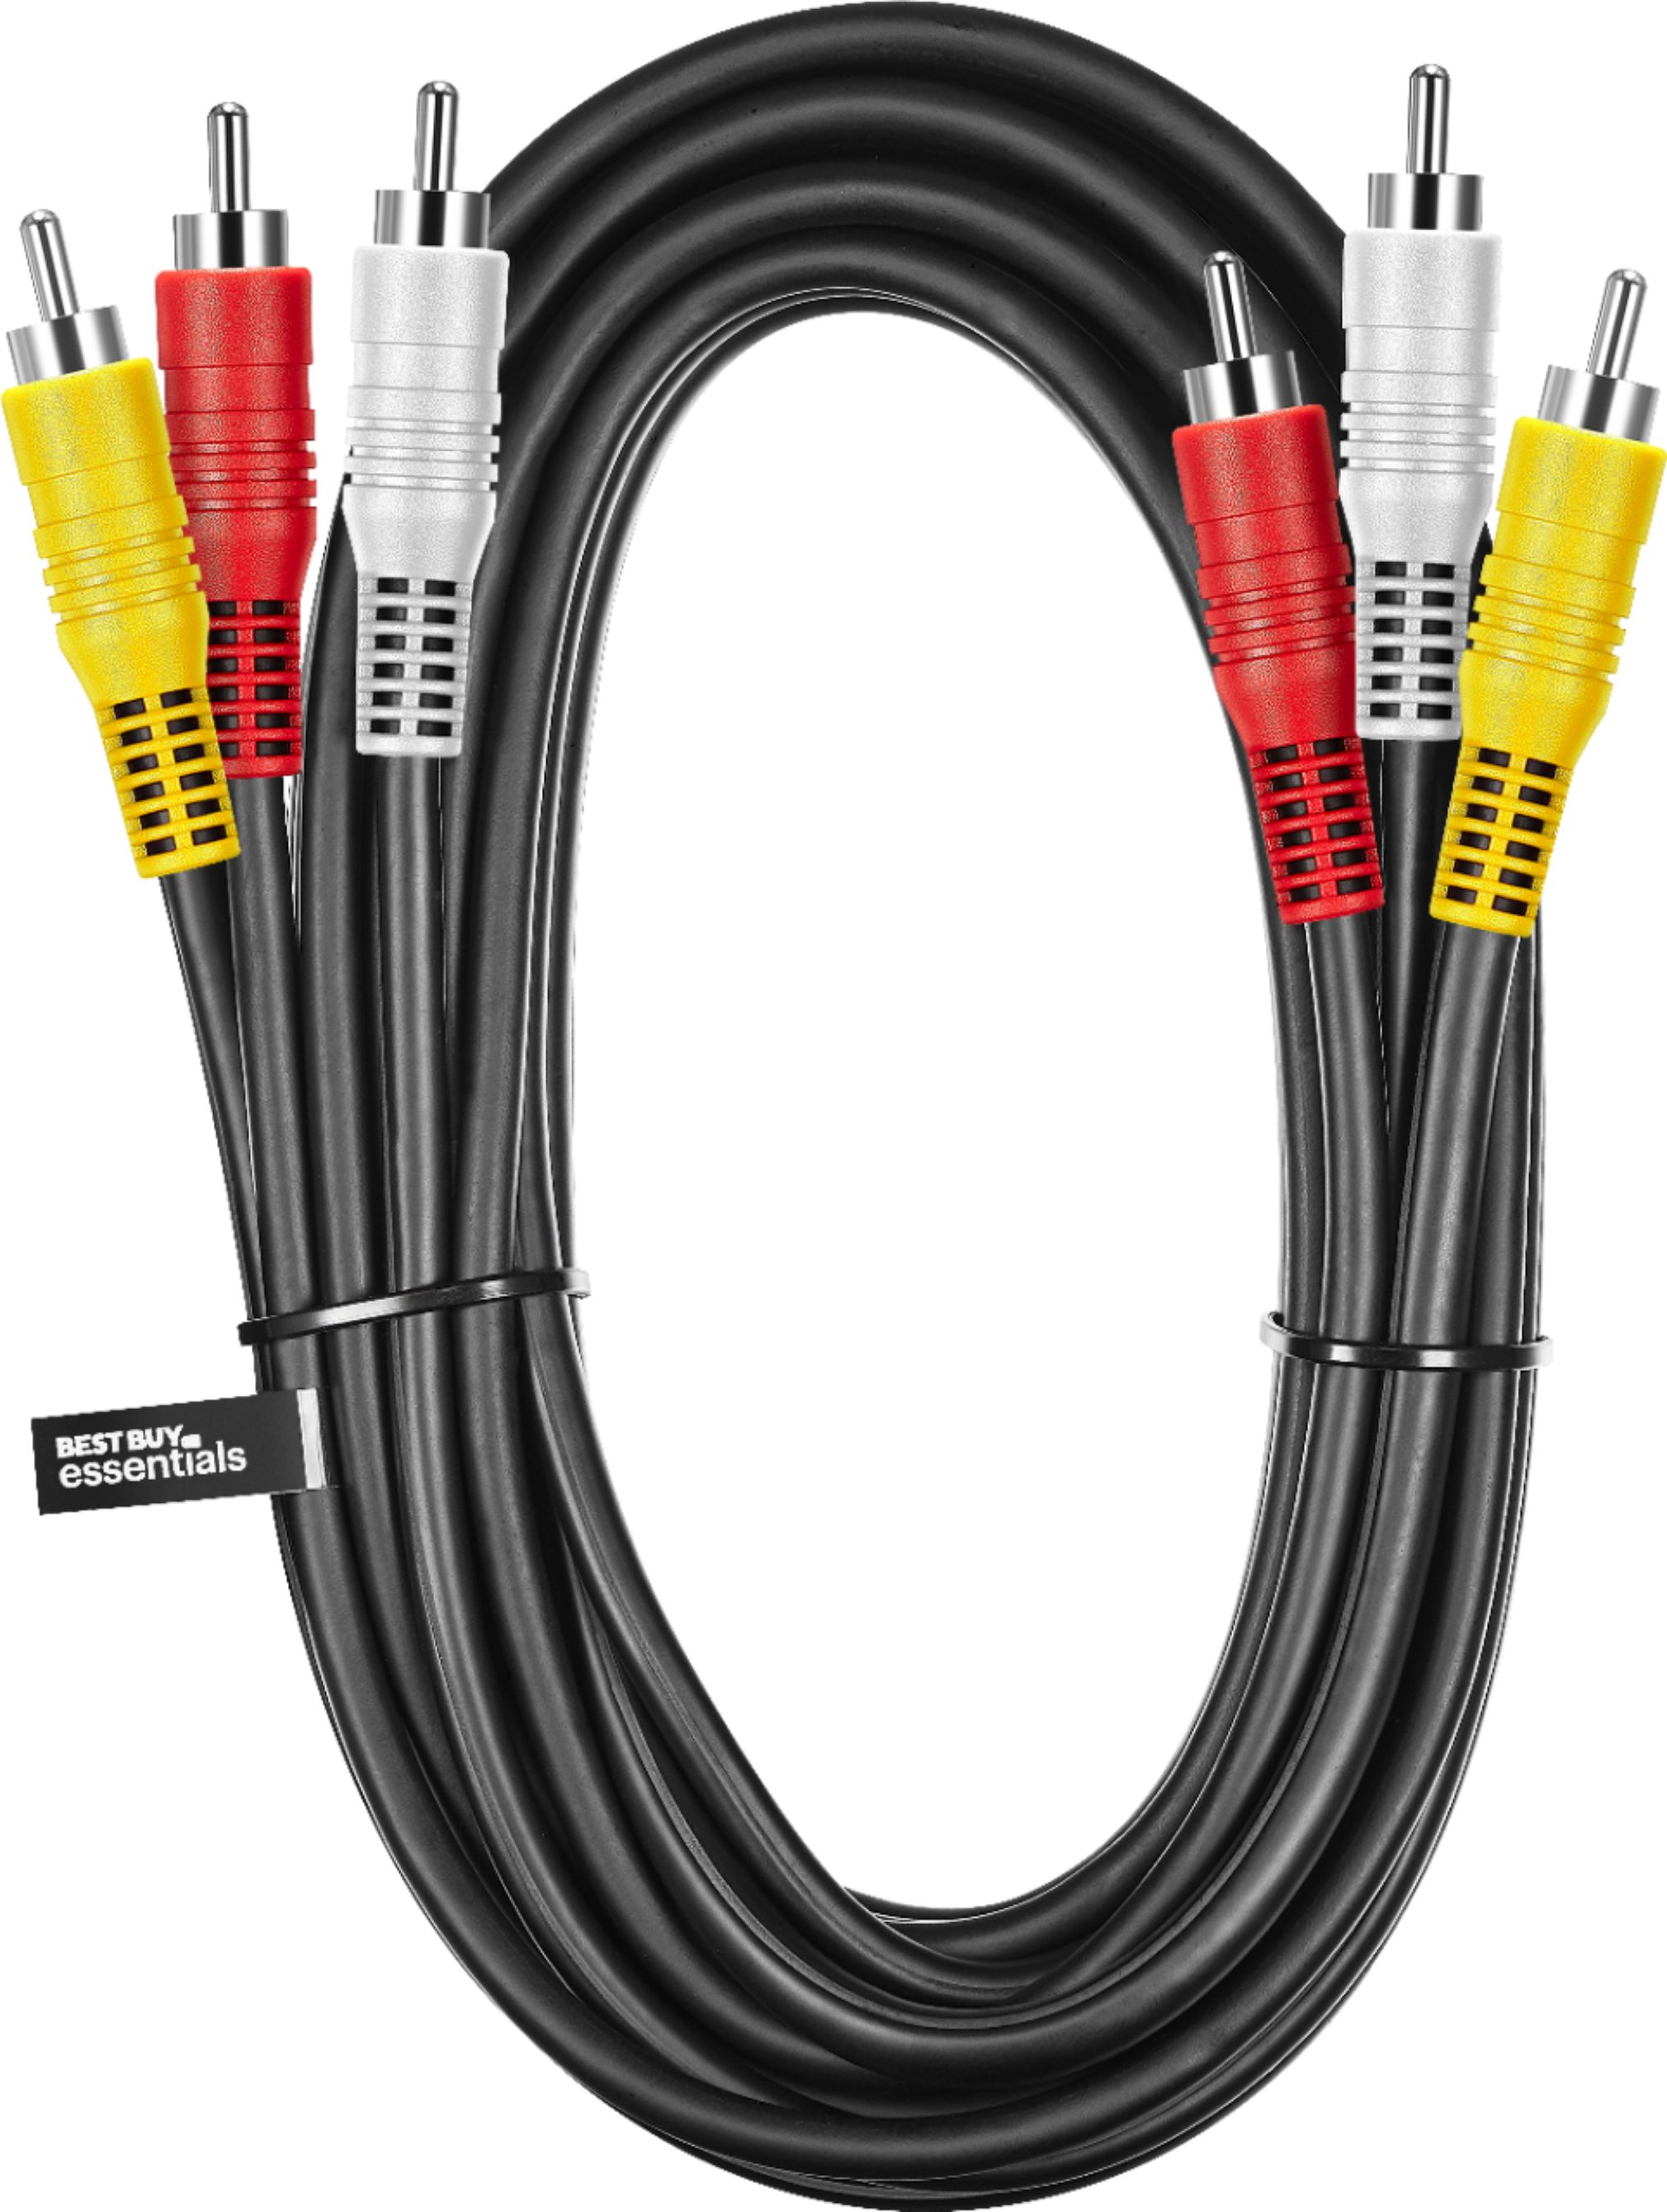 rj45 cable - Best Buy